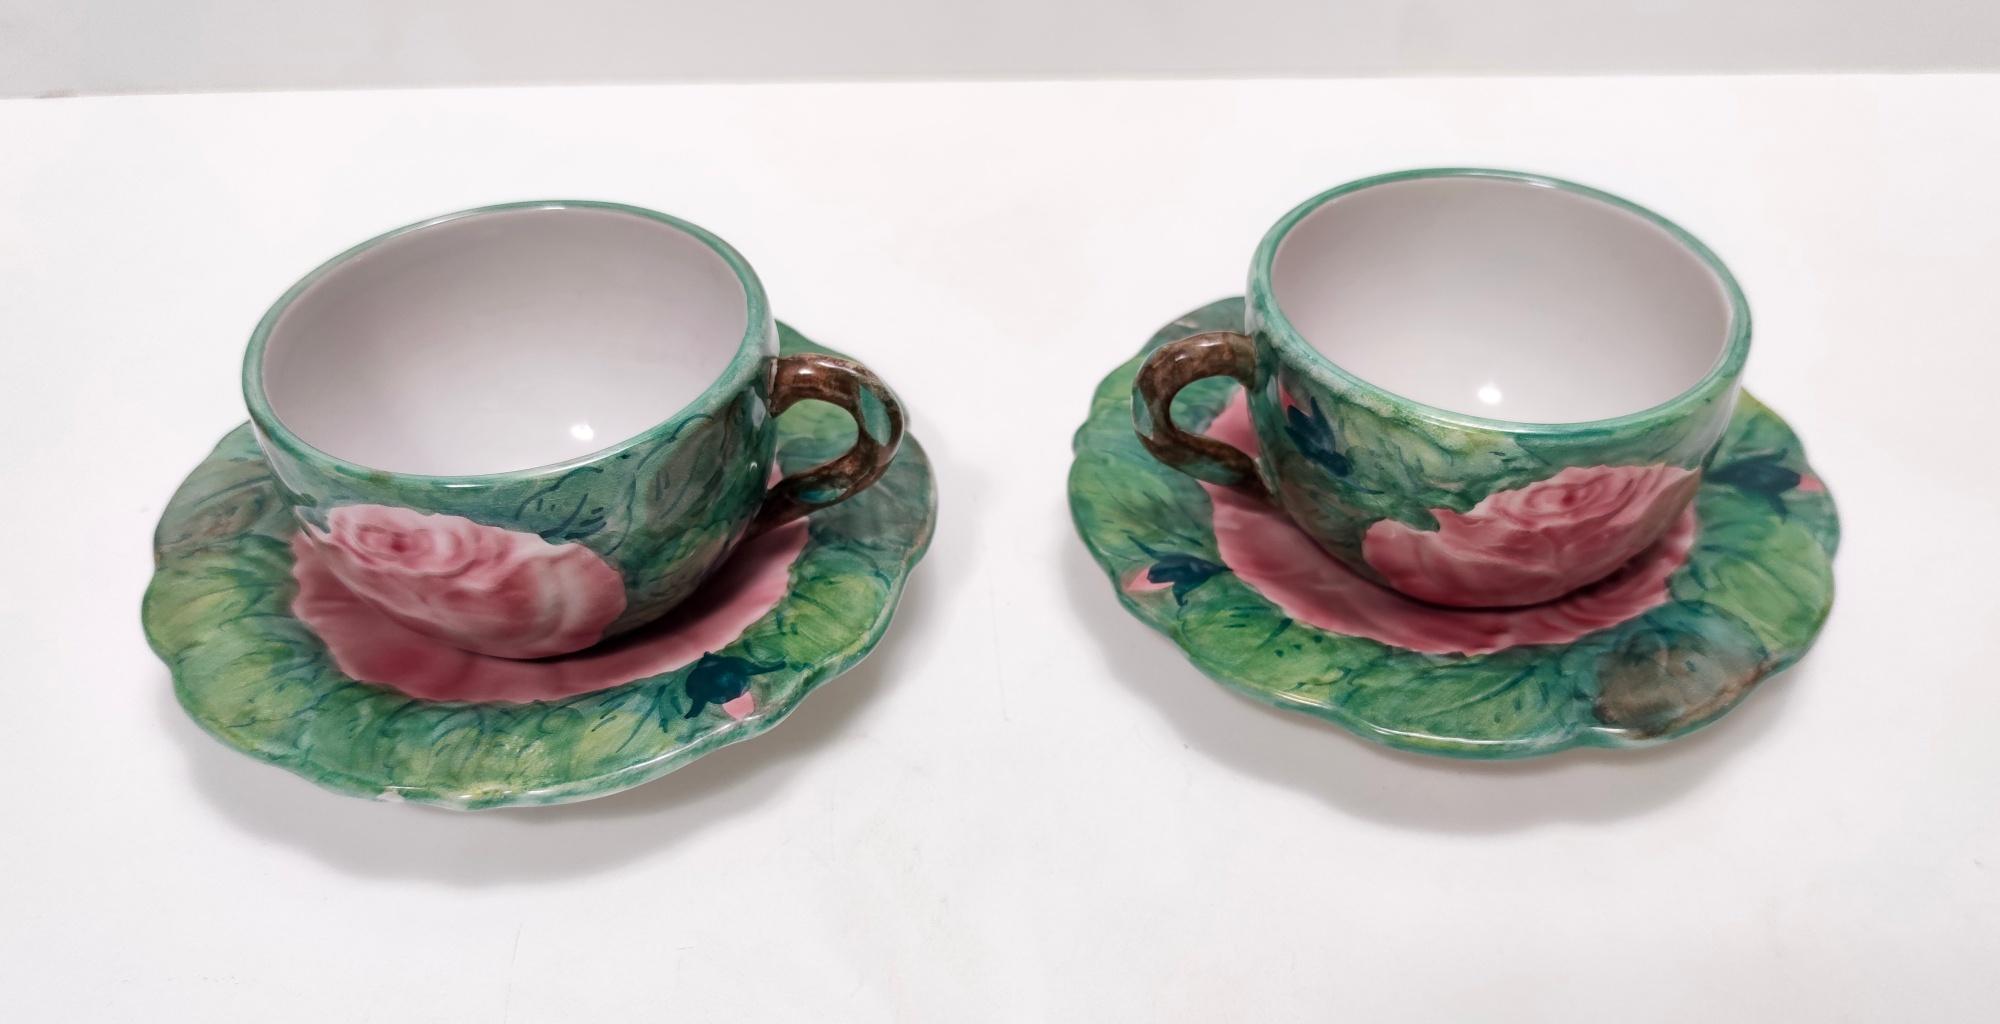 Italian Pair of Vintage Earthenware Tea /Coffee Cups with Floral Motifs by Zaccagnini For Sale